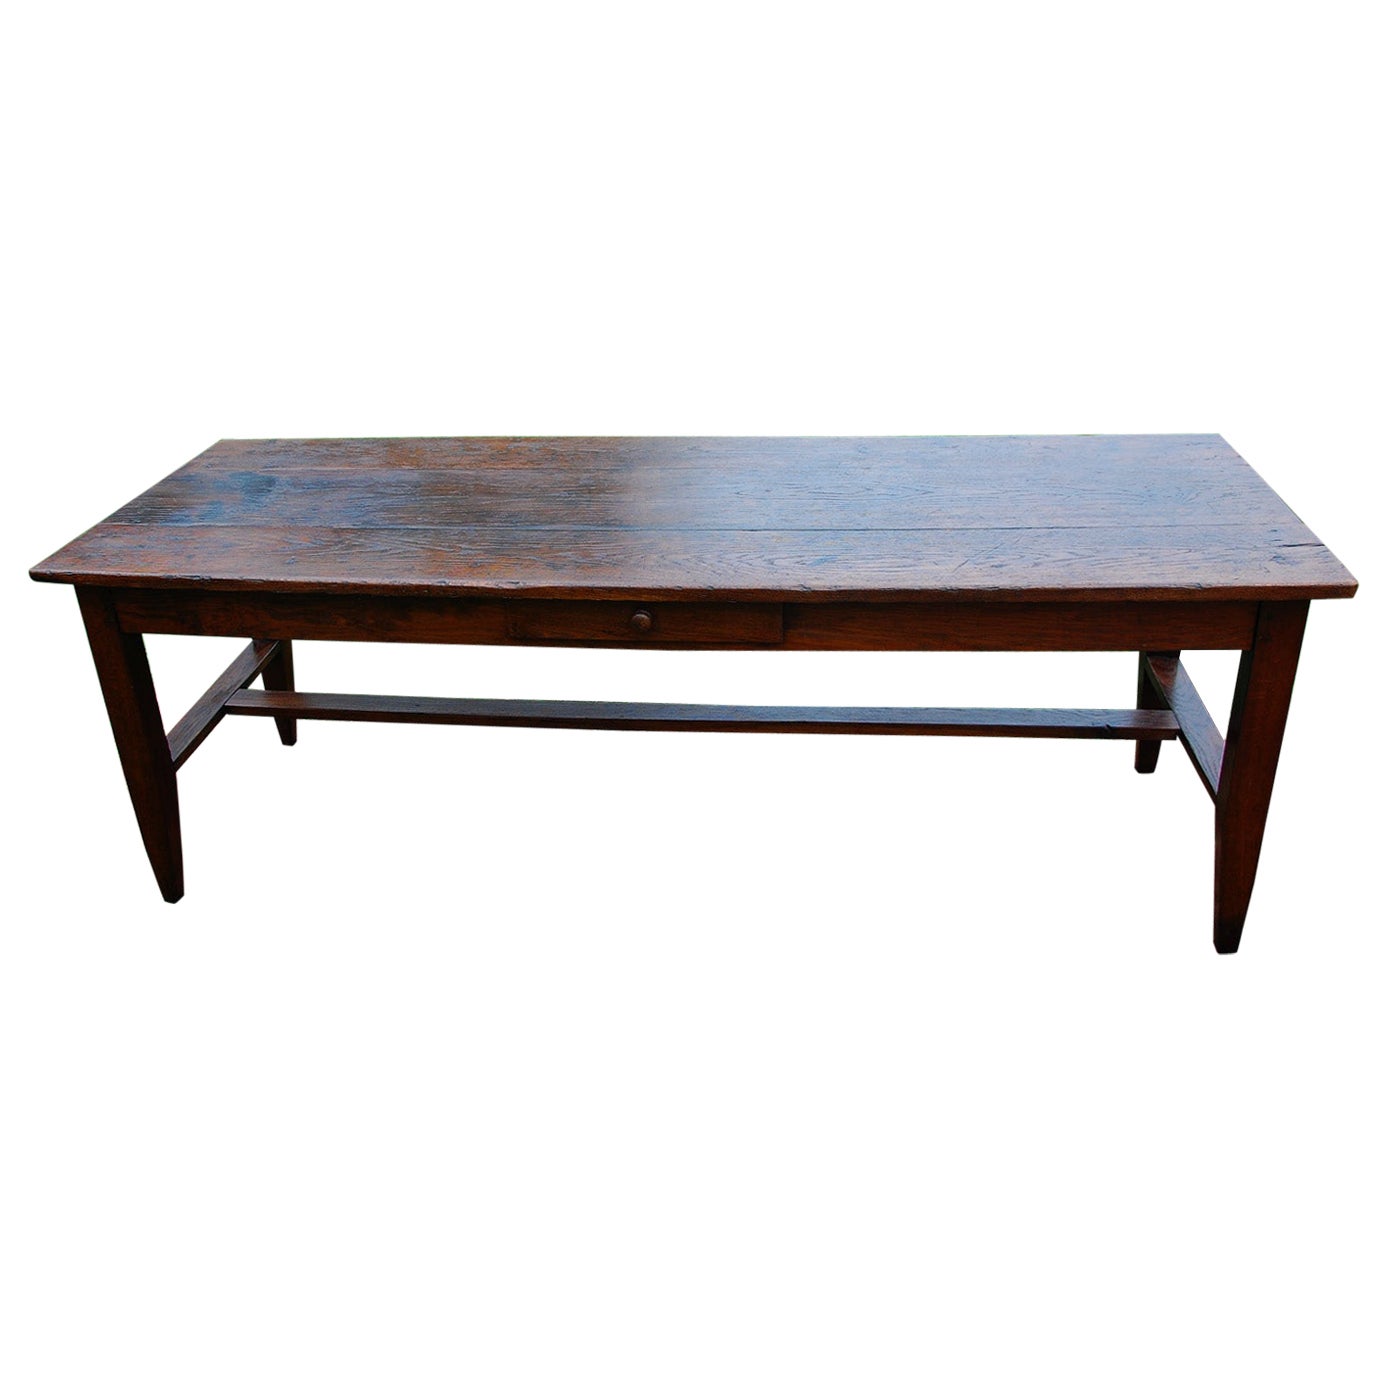 French Mid 19th Century Provincial Farmhouse Table in Oak and Chestnut